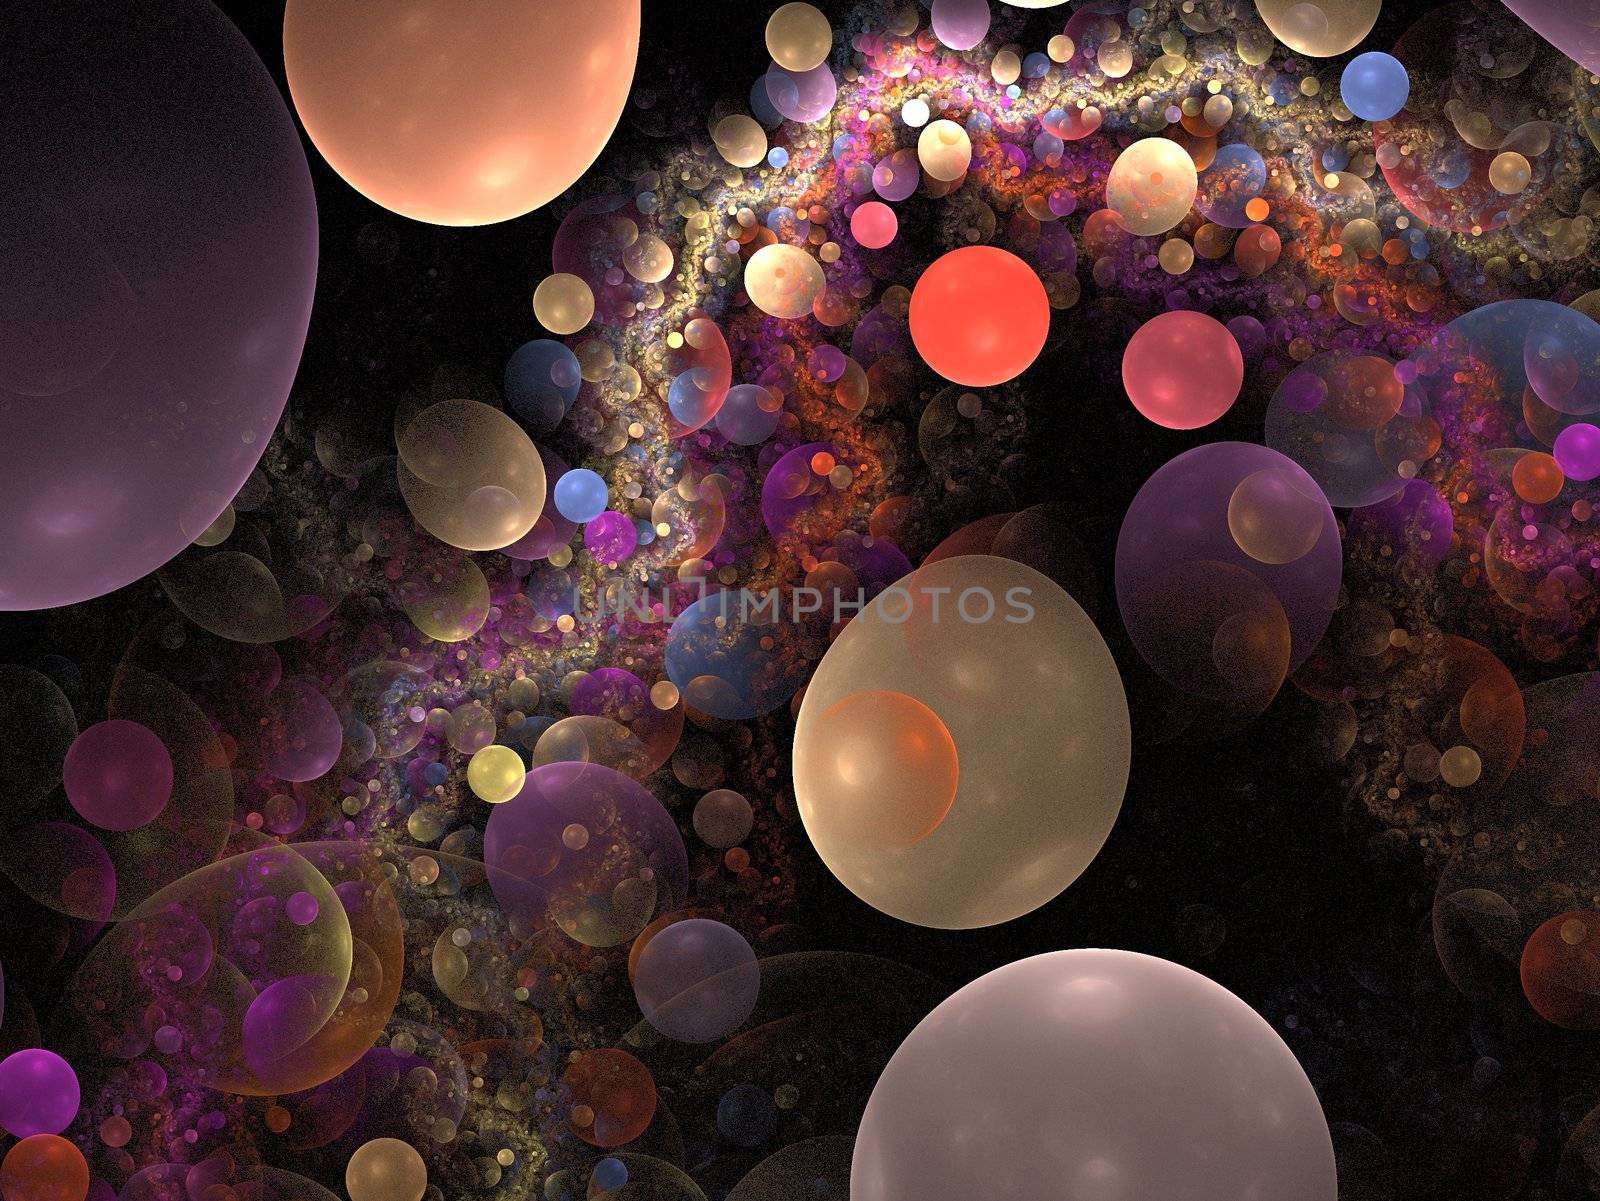 Abstract Bubblered Background by jbouzou